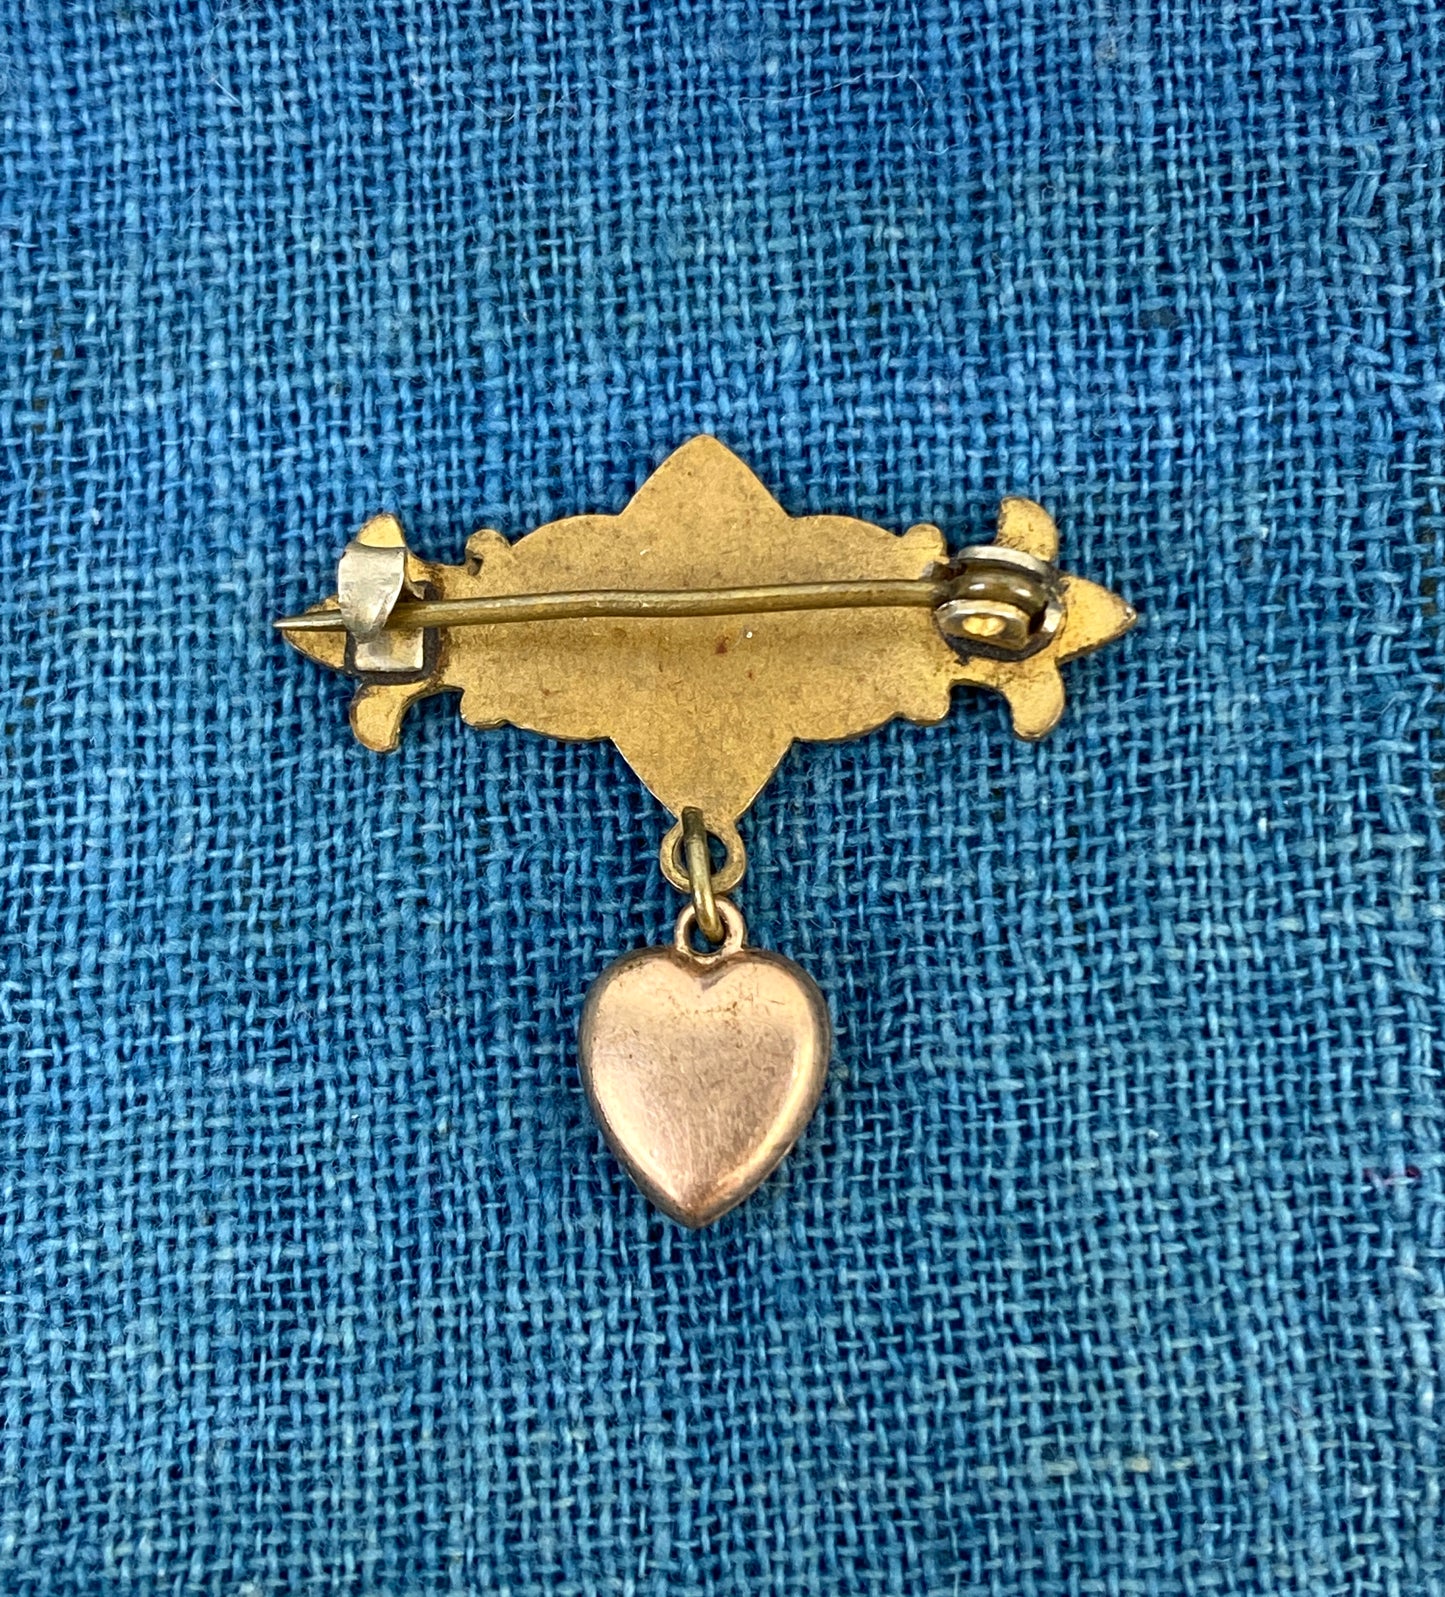 Antique Victorian Religious Brass Pin-Back Metal Brooch/ Bar Pin with Heart Dangle